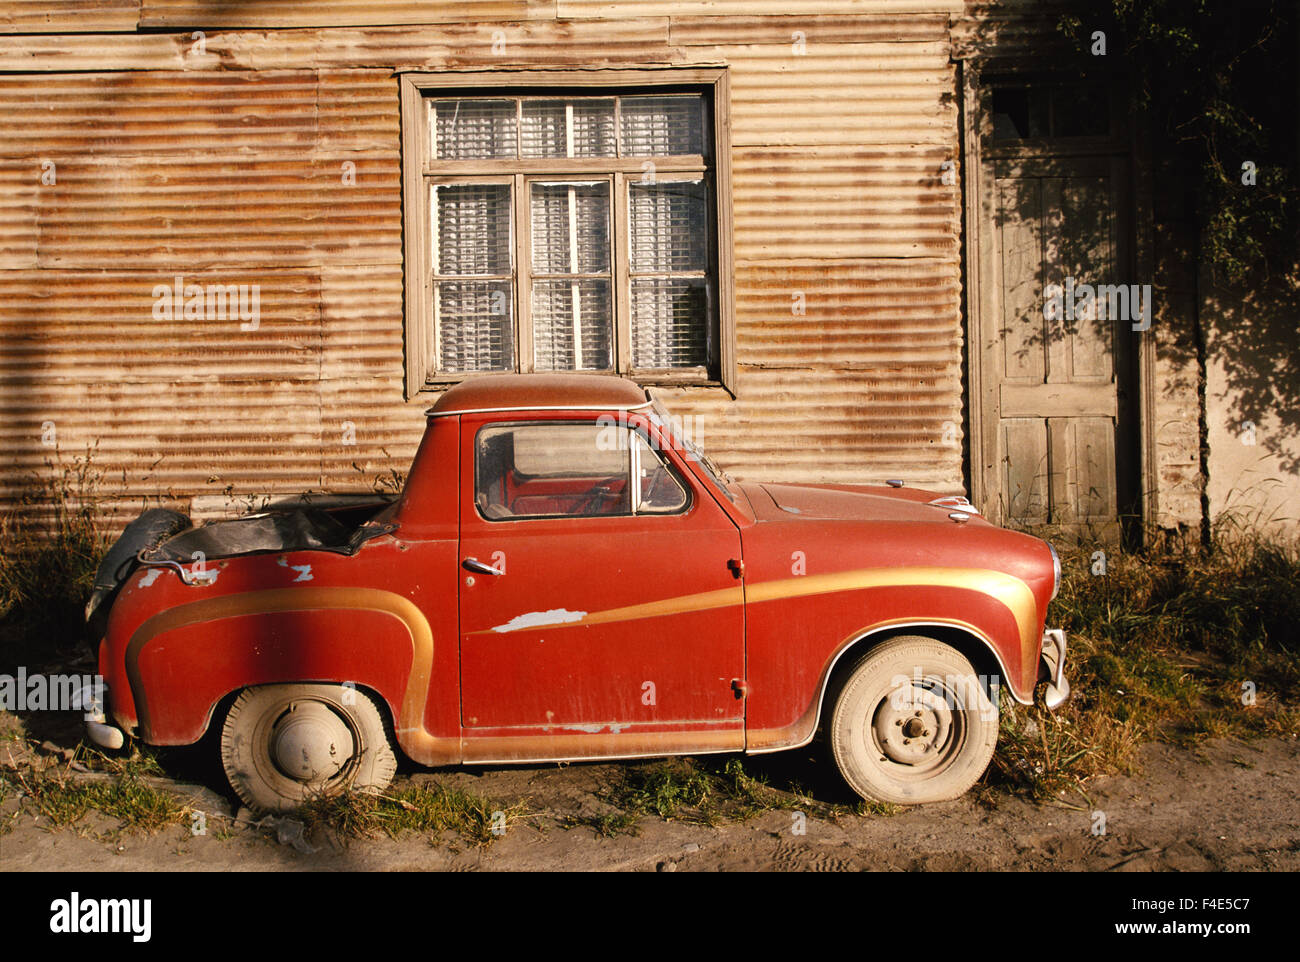 Punta Arenas, Old car and house. (Large format sizes available) Stock Photo